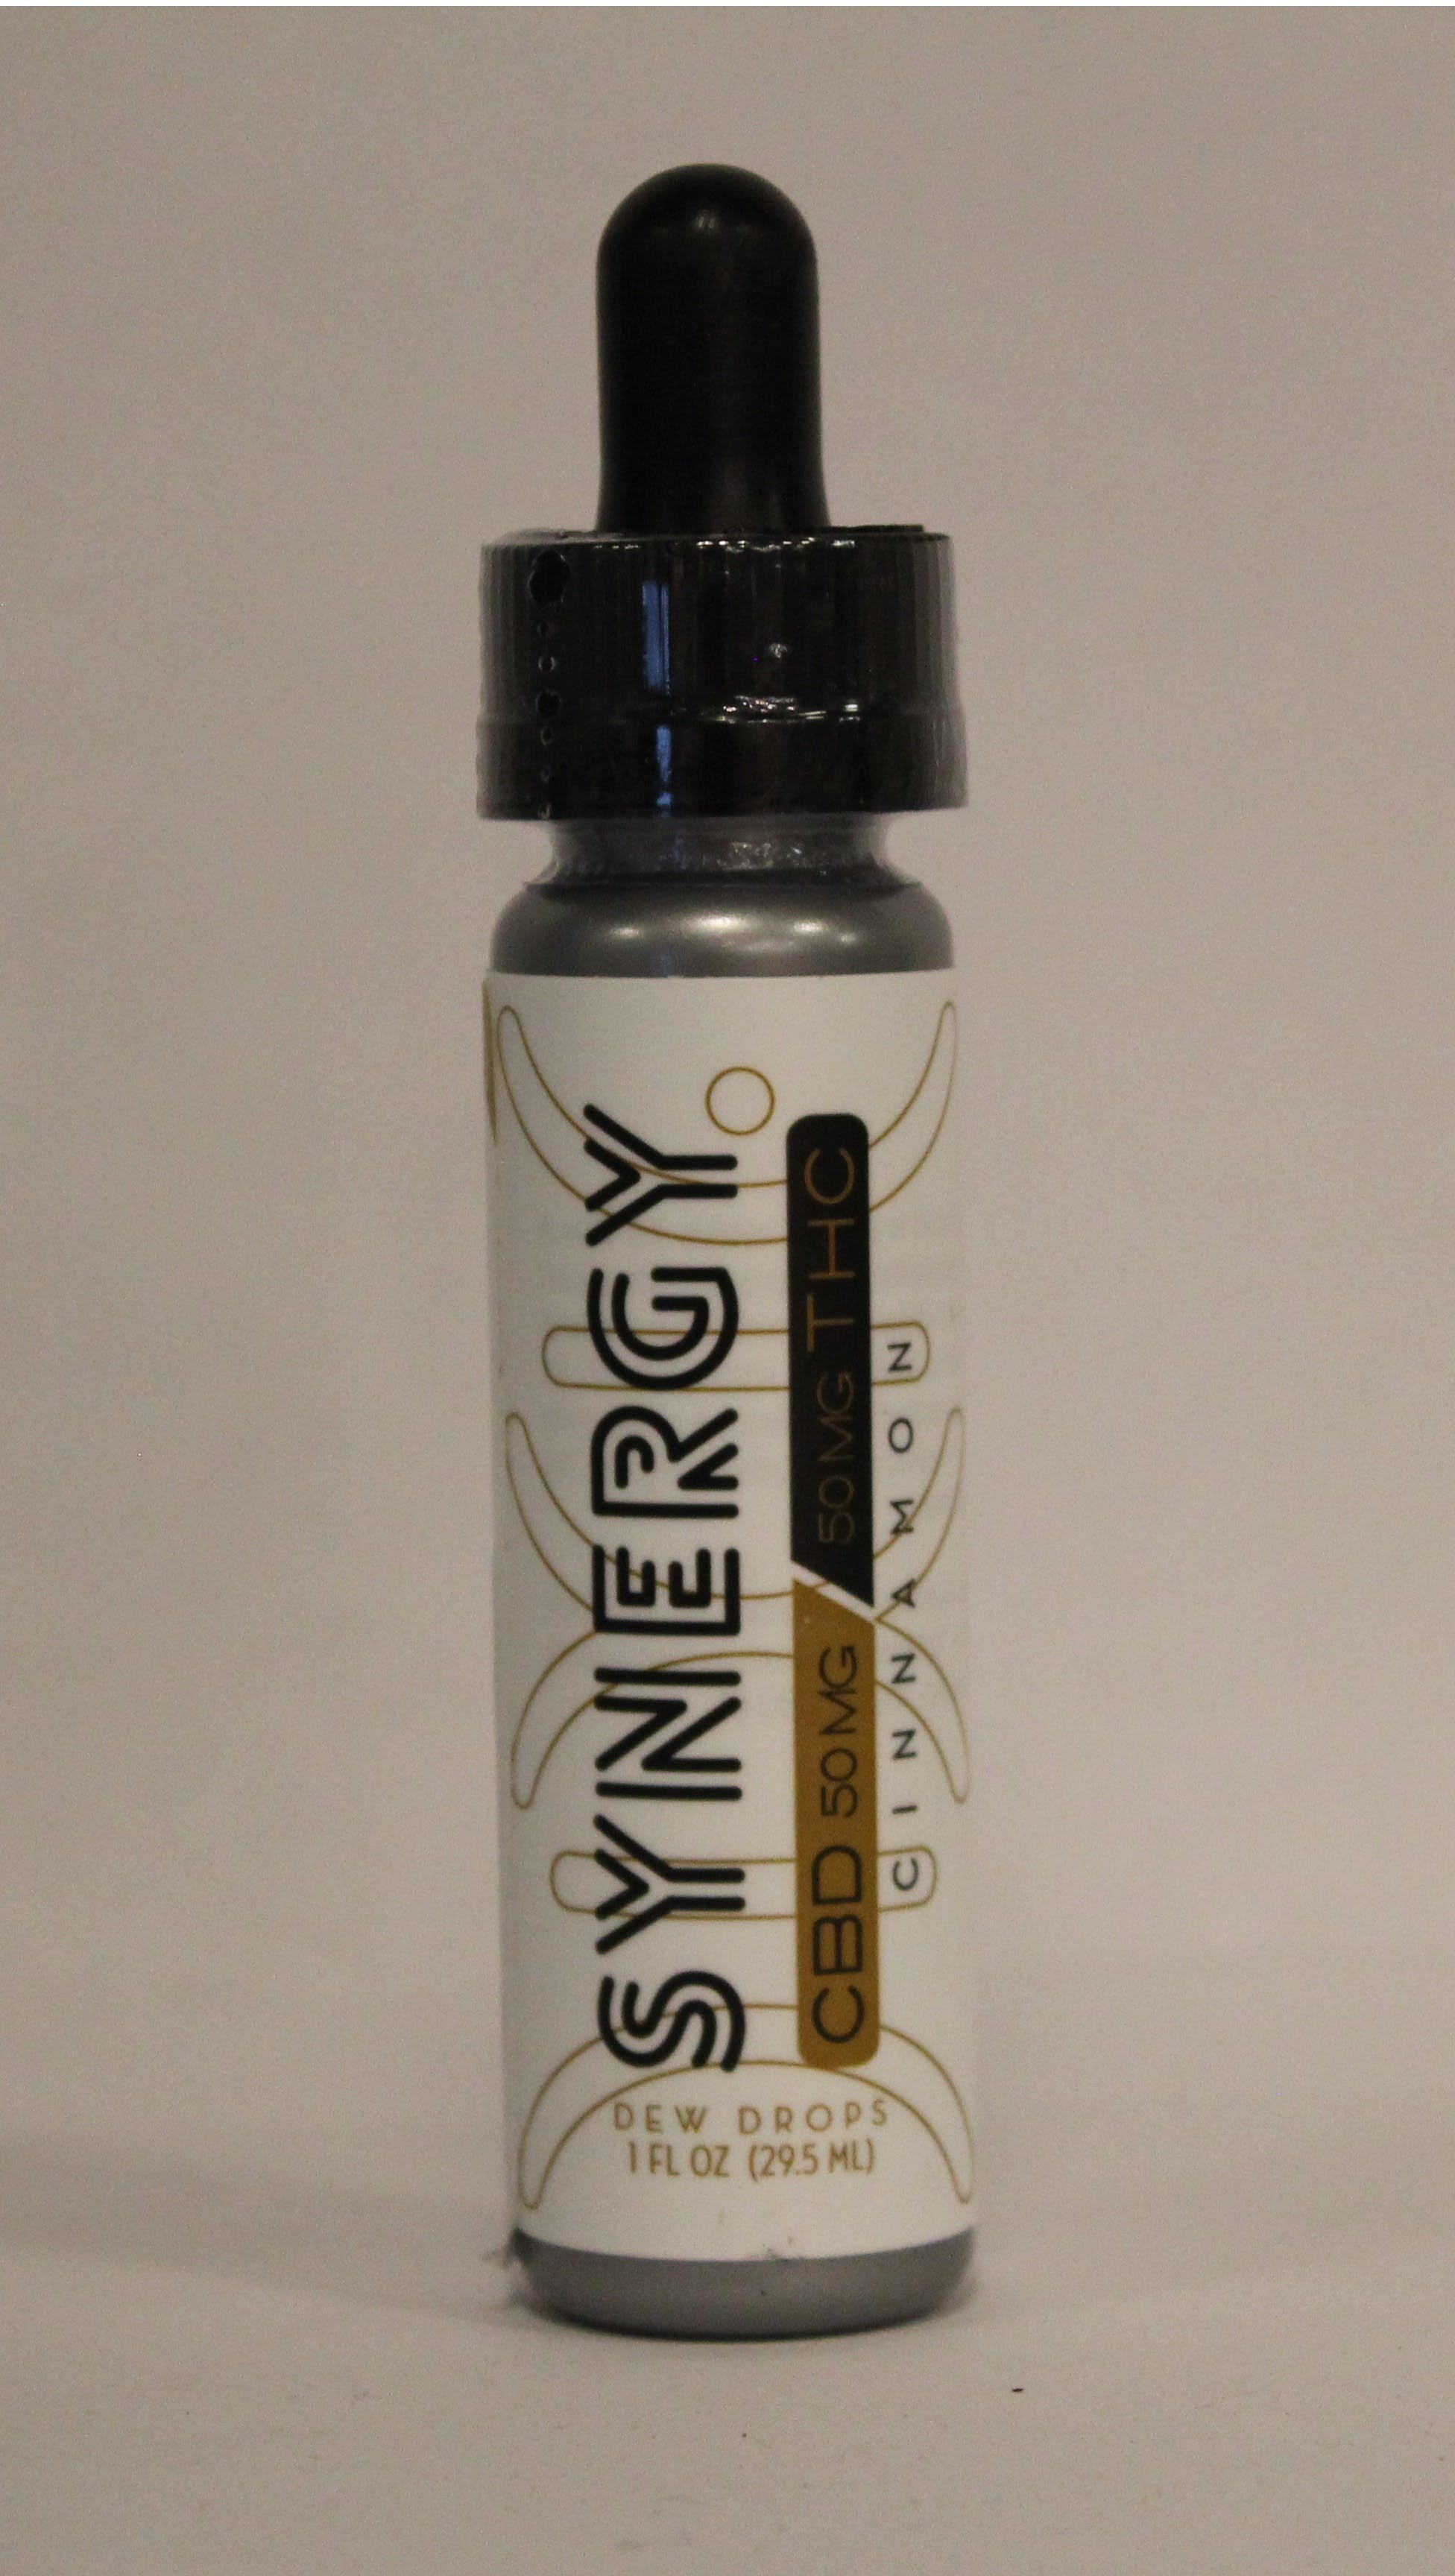 tincture-dixie-synergy-drops-100mg